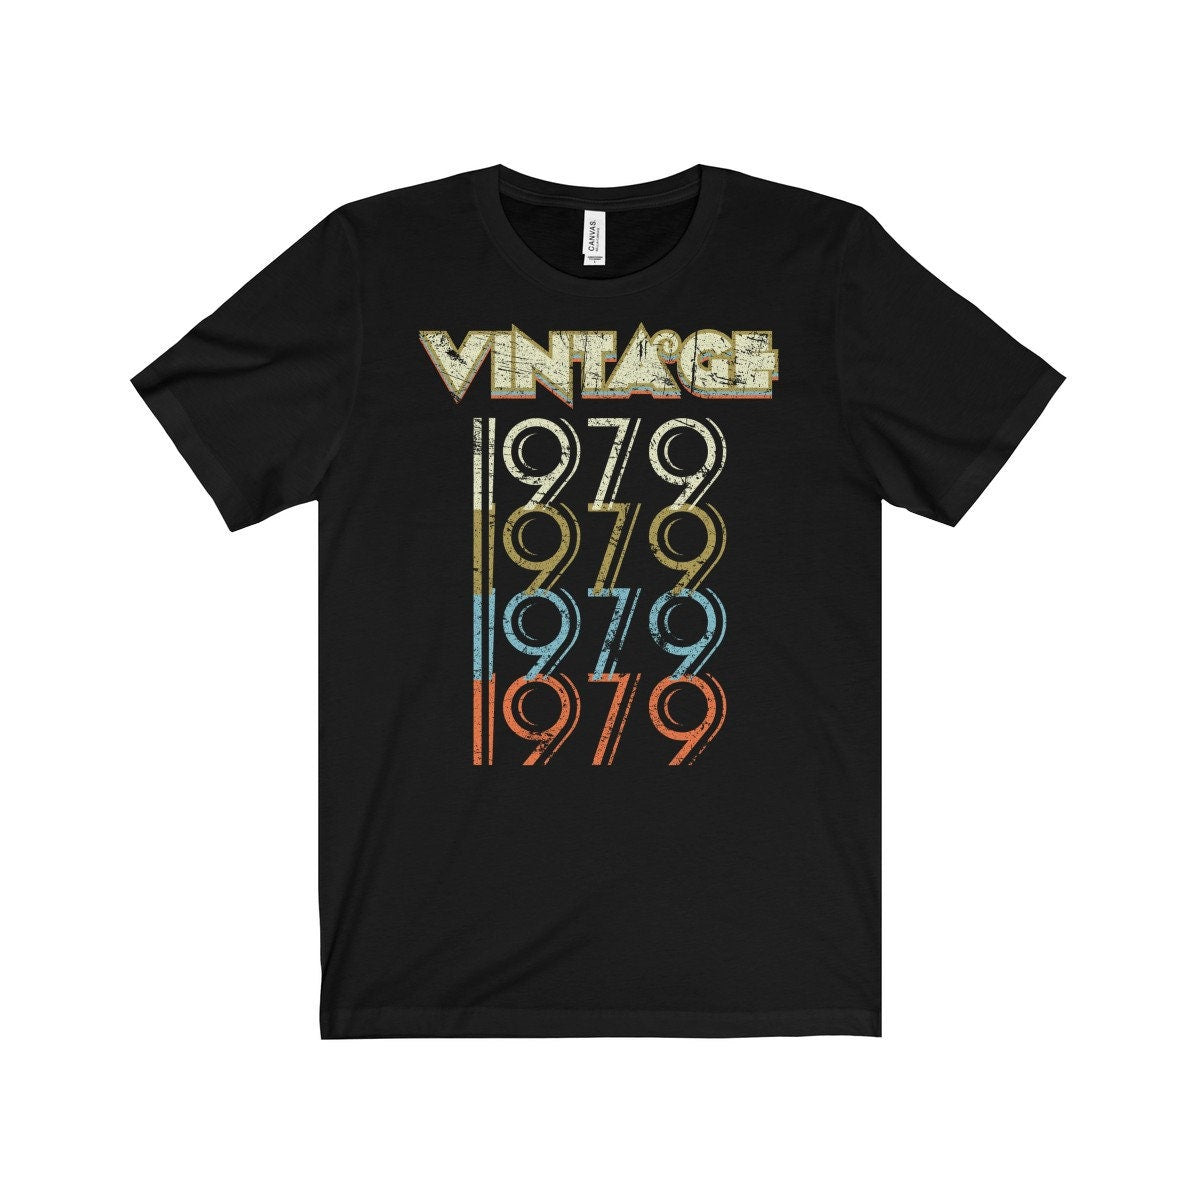 43rd Birthday Gift, 1979 T Shirt in Retro & Vintage 70s style for Men or Women Unisex Jersey Short Sleeve Tee Shirt Top